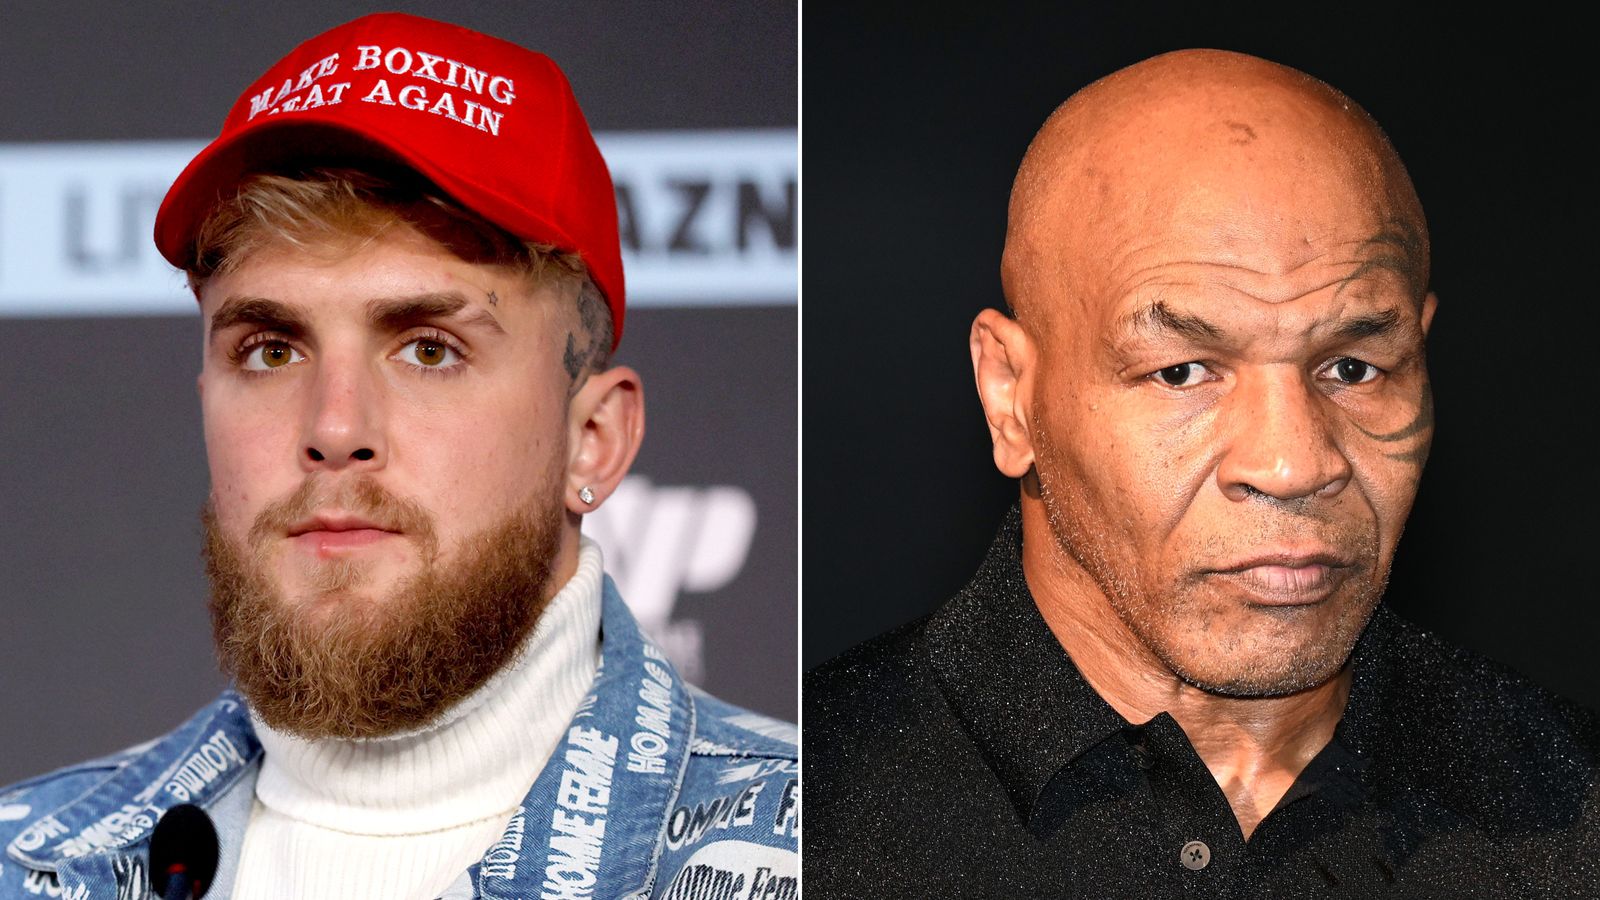 YouTuber Jake Paul to face boxing legend Mike Tyson in Exhibition Fight on Netflix